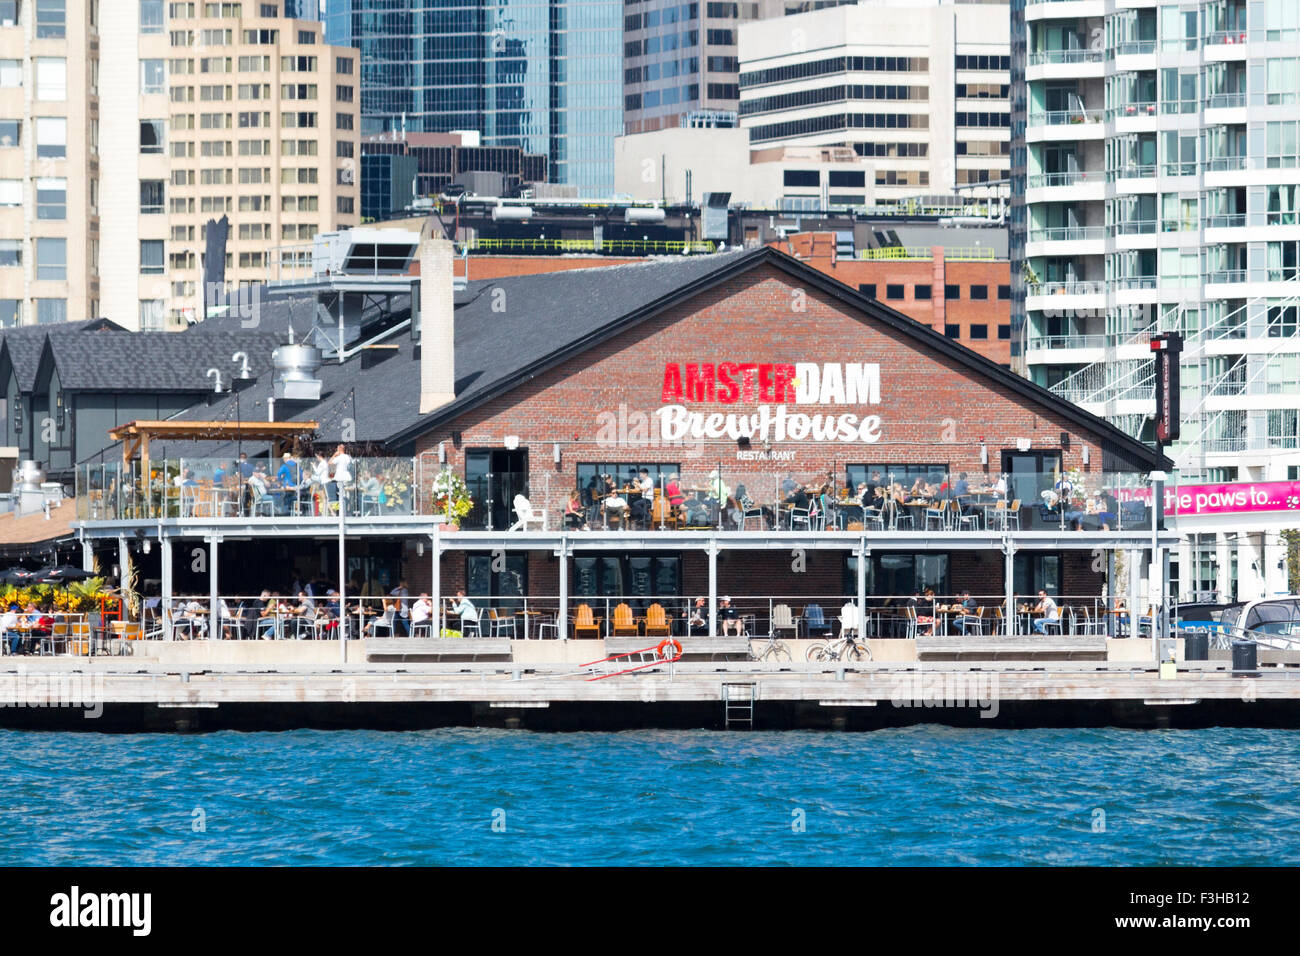 The Amsterdam BrewHouse on the waterfront in Toronto, Ontario, Canada Stock  Photo - Alamy